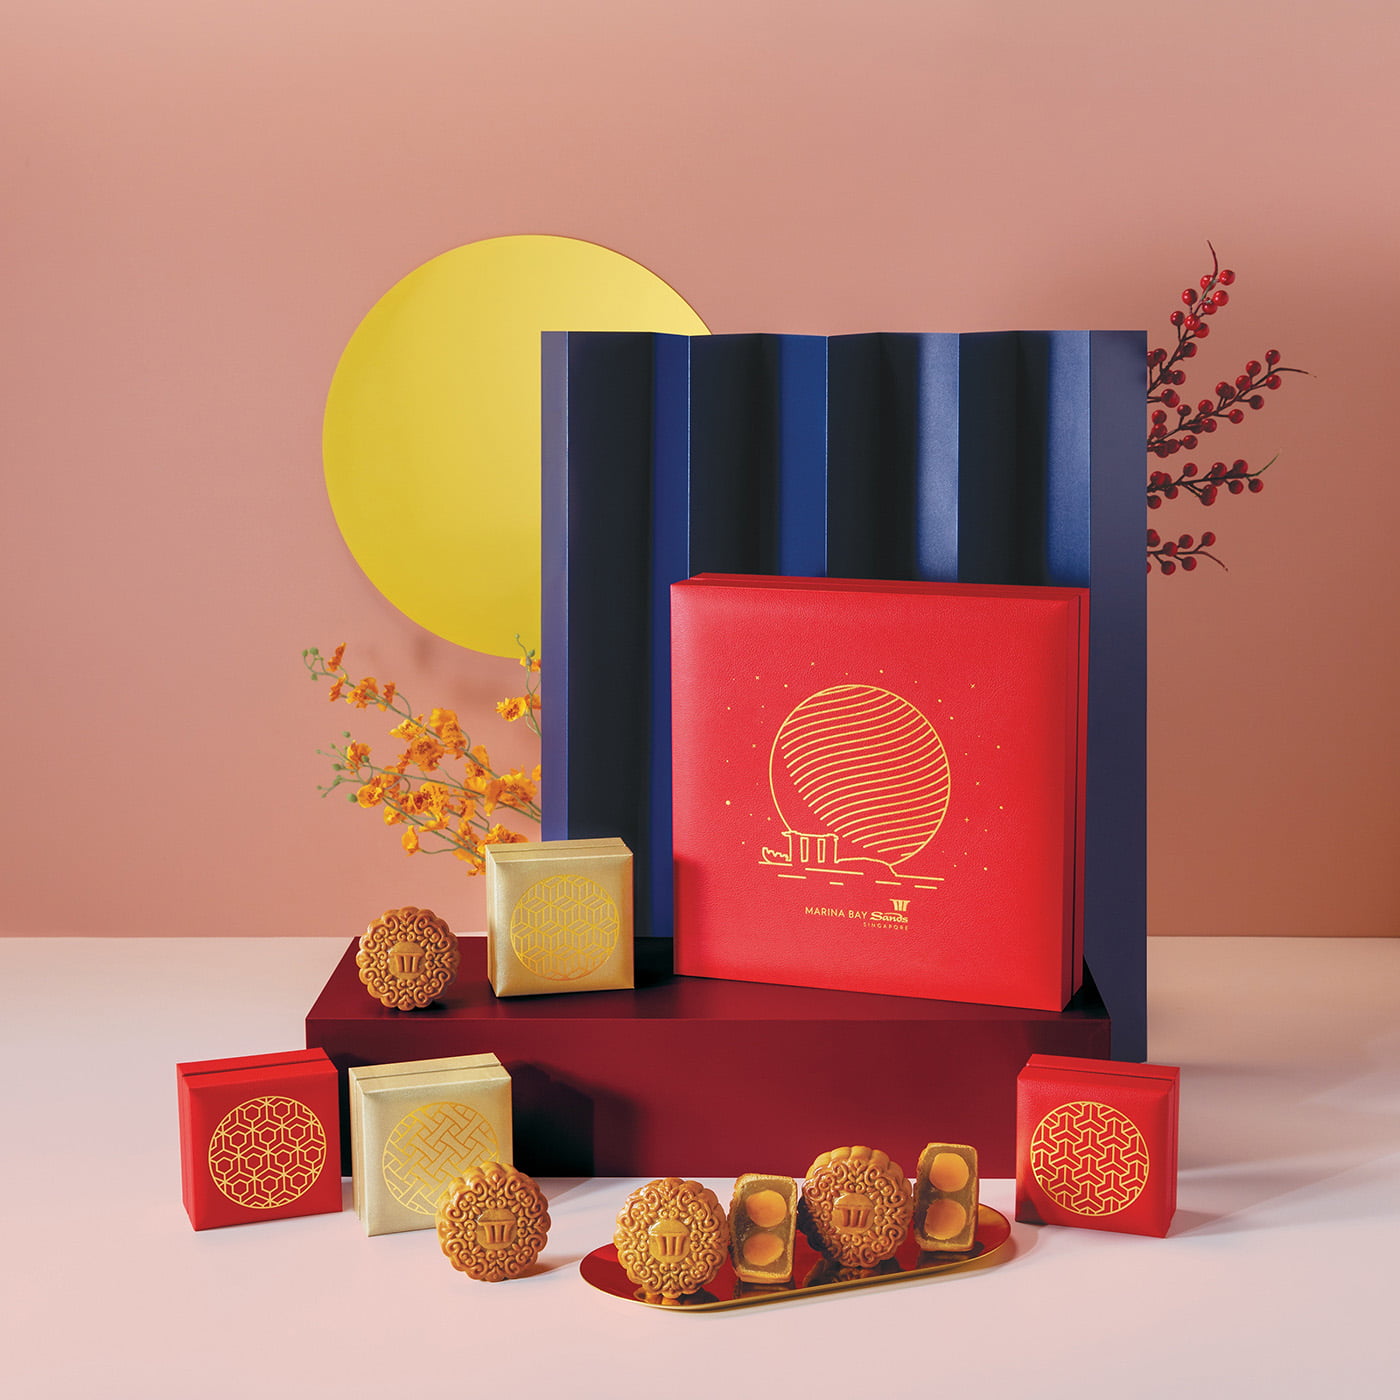 SNAP TASTE Magazine 2022 Mooncakes Collection At Marina Bay Sands